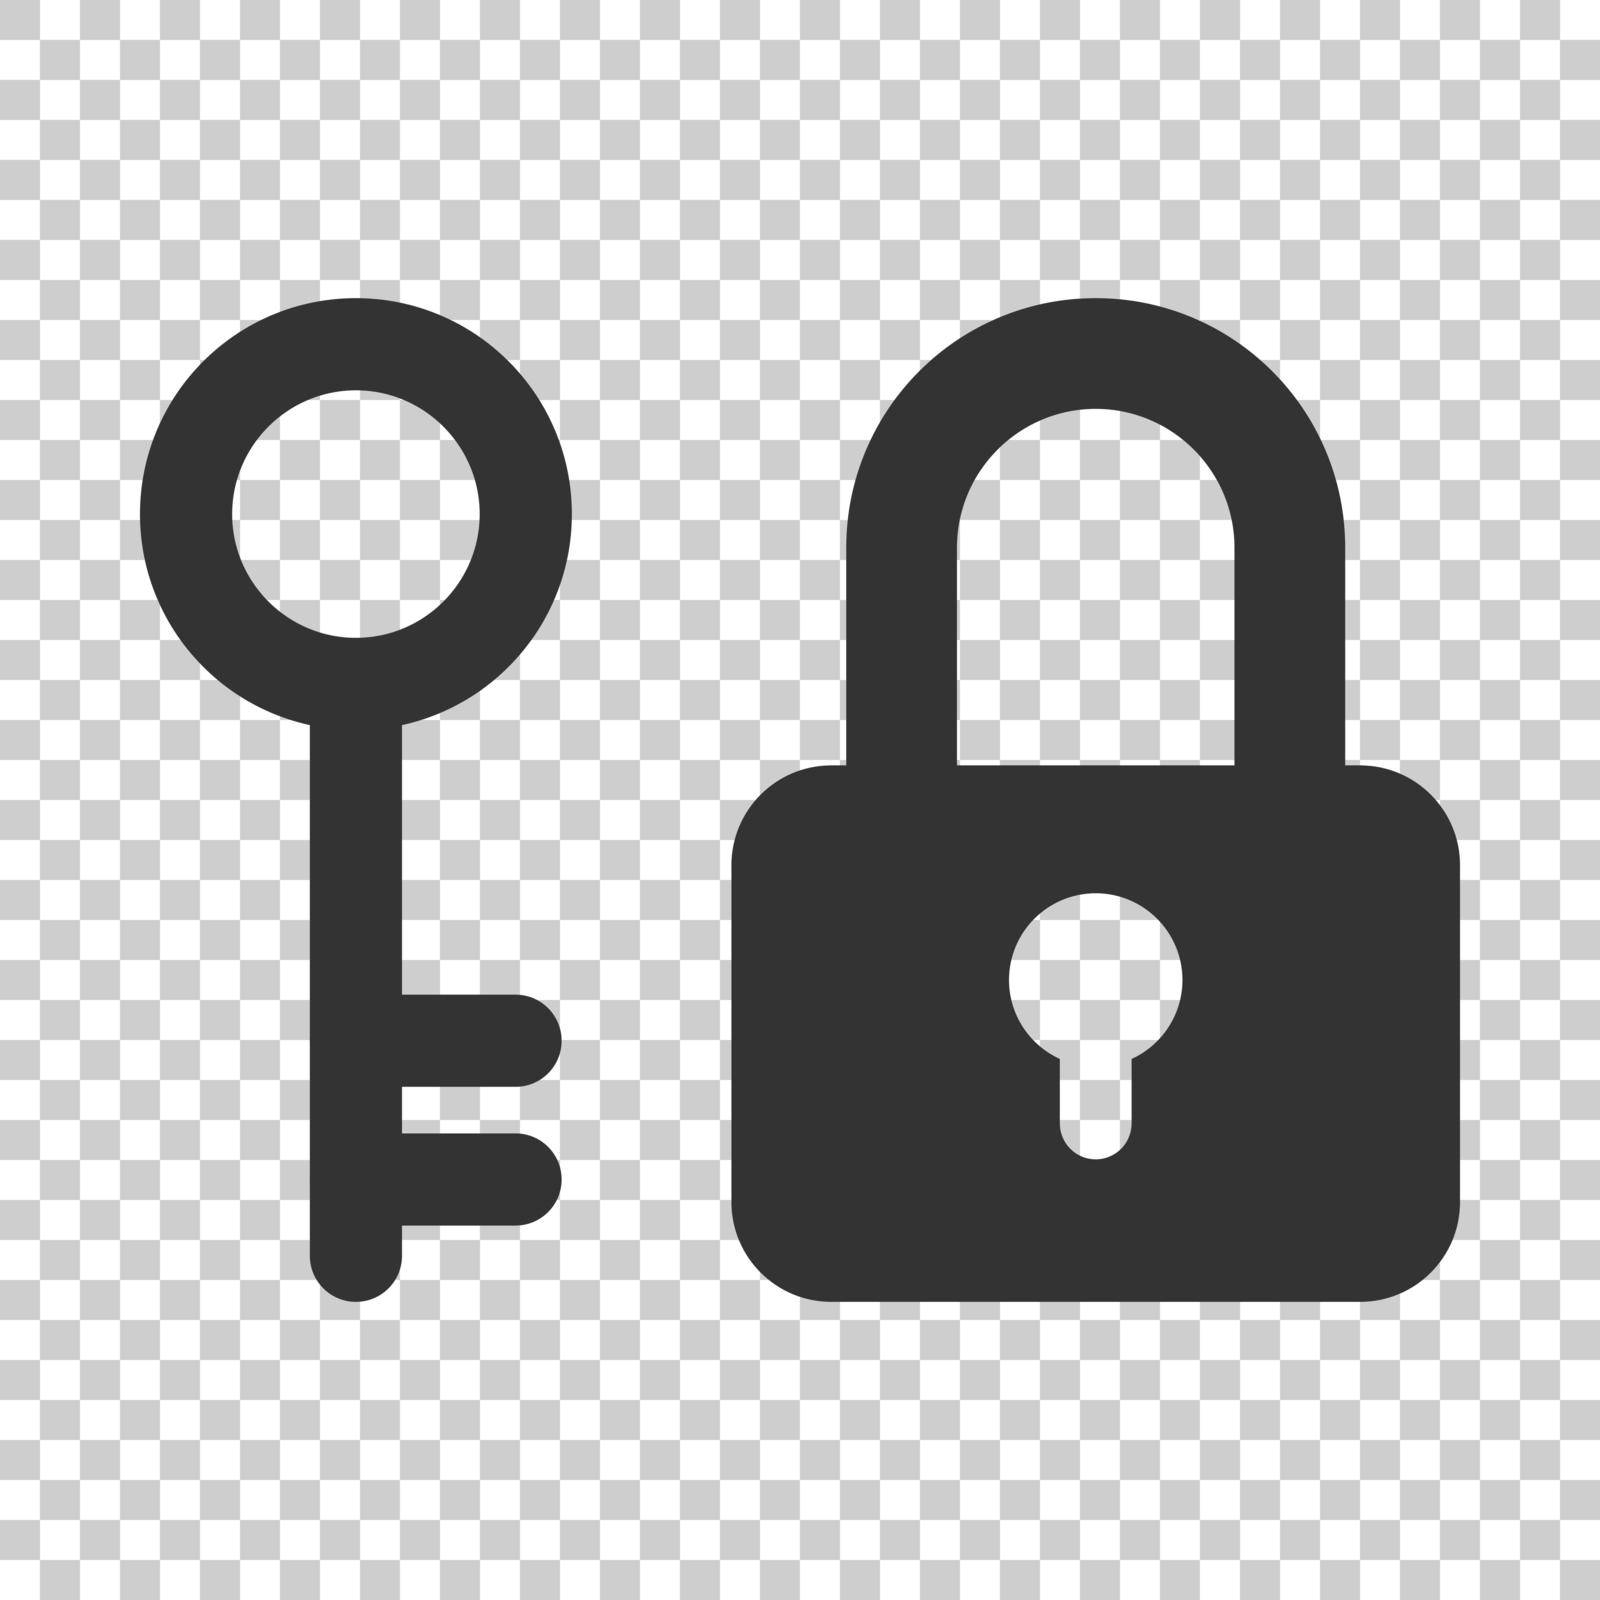 Key with padlock icon in flat style. Access login vector illustration on isolated background. Lock keyhole business concept. by LysenkoA